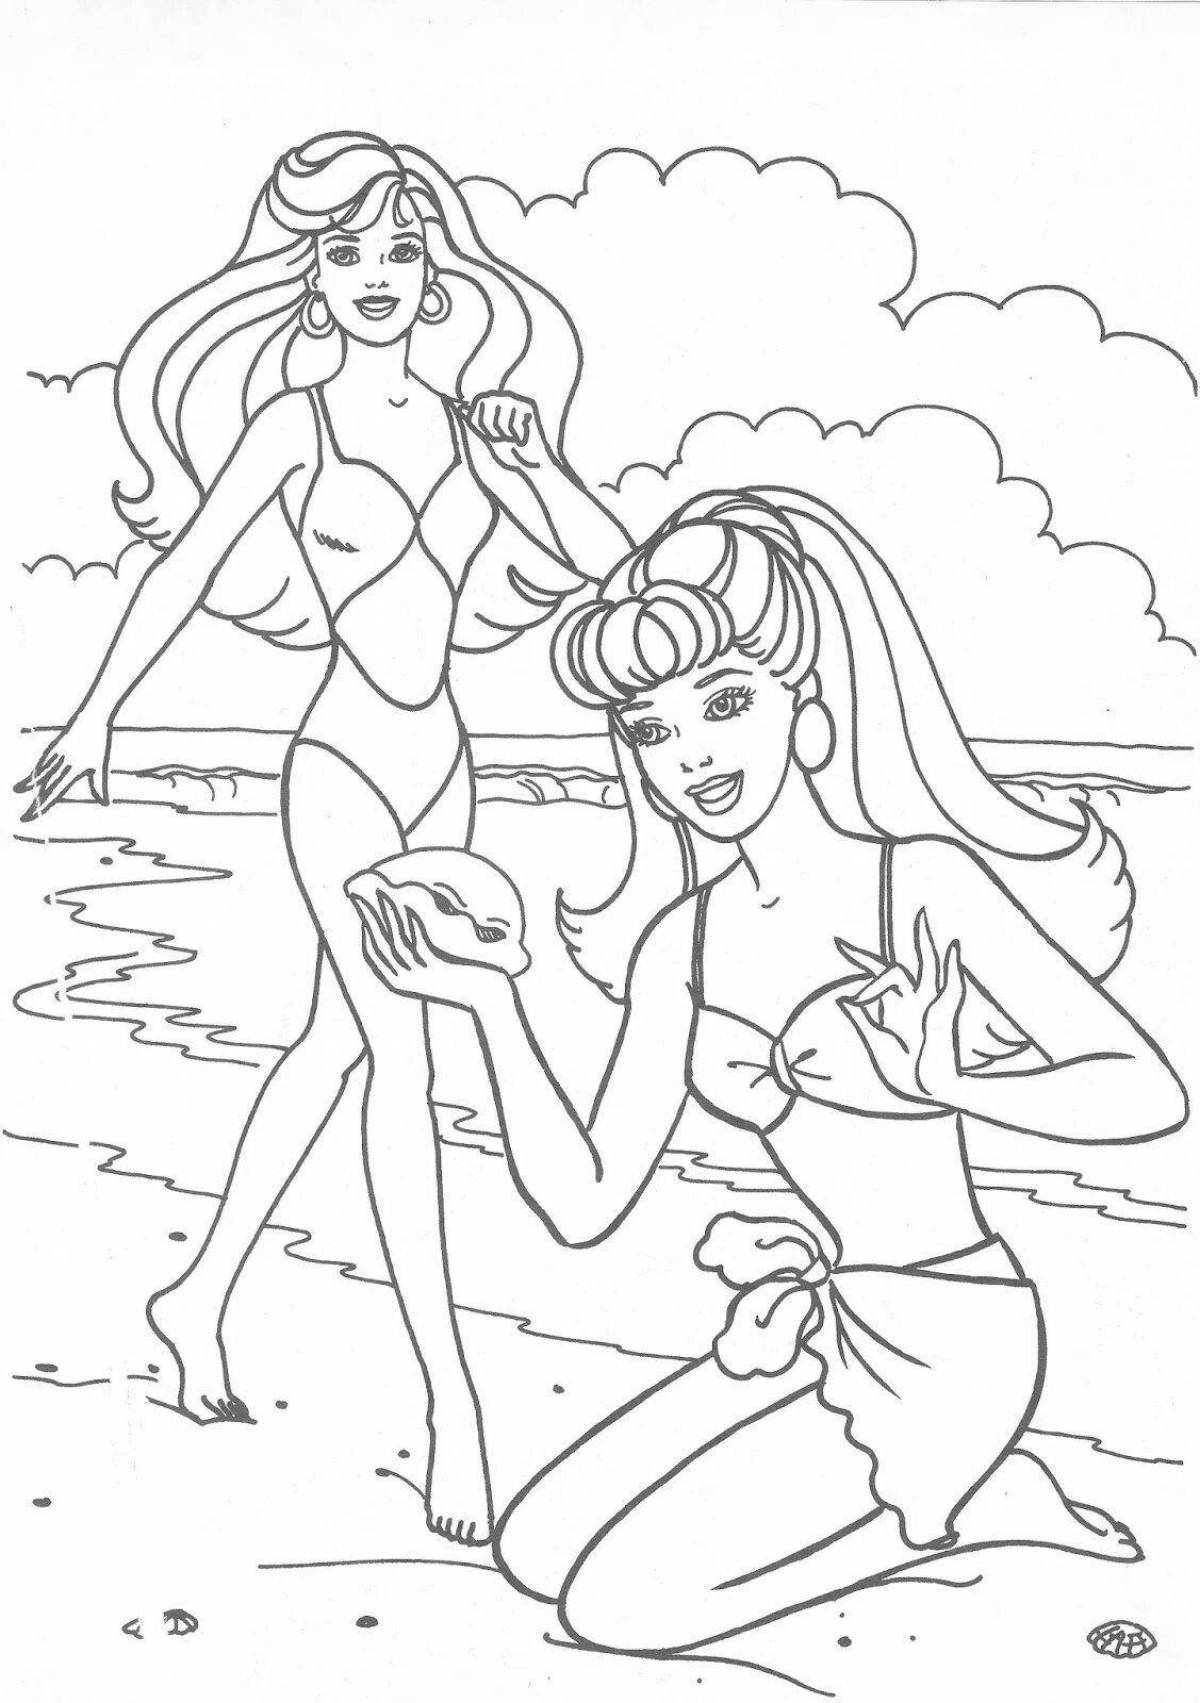 Exquisite barbie in the sea coloring page